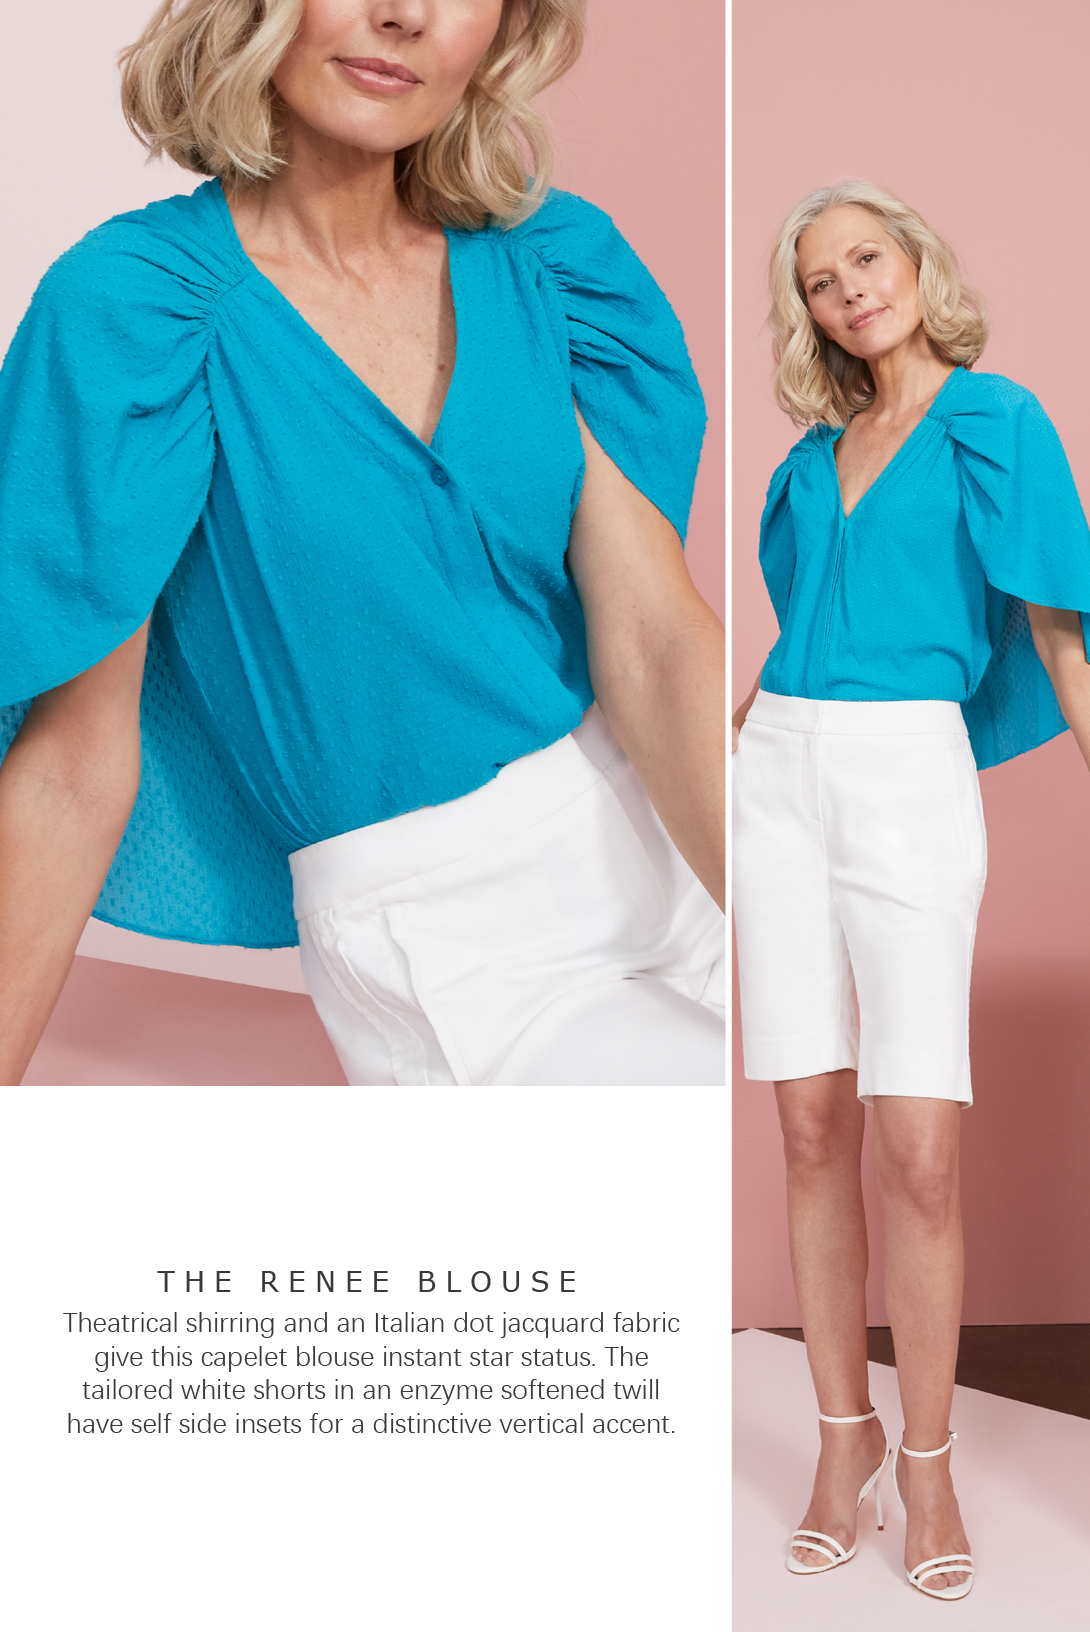 The Renee Blouse